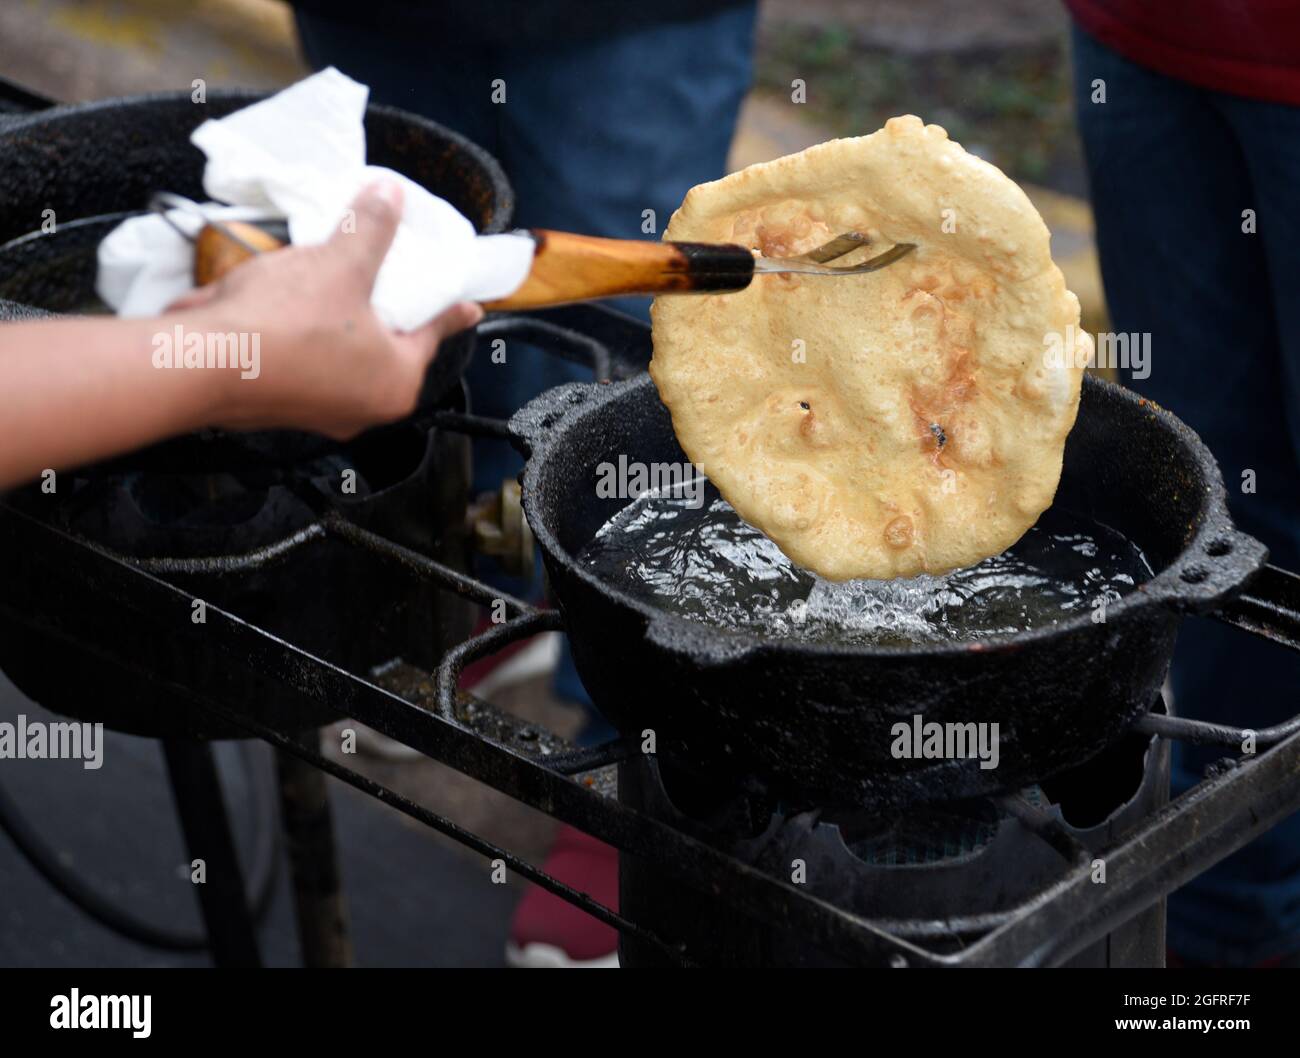 Native American volunteer cooks make Indian tacos or Indian fry bread  at an outdoor  food stand at the annual Santa Fe Indian Market in New Mexico. Stock Photo